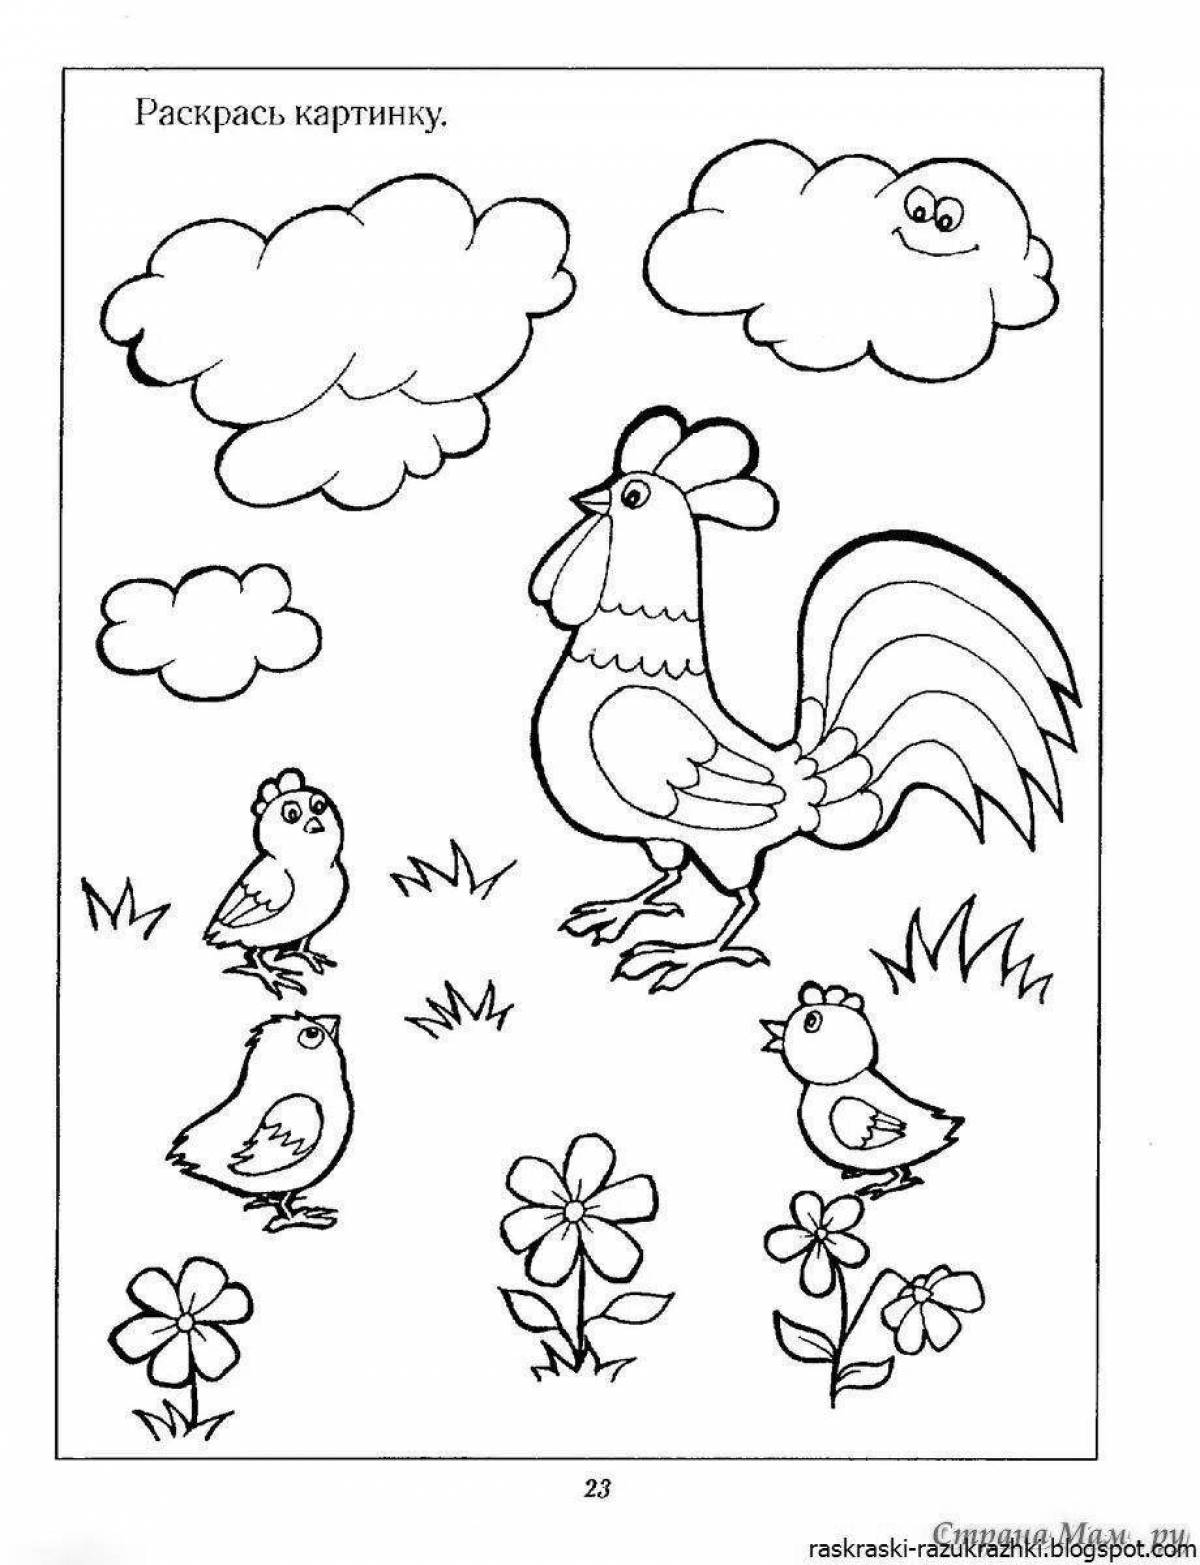 Attractive coloring book for children, educational